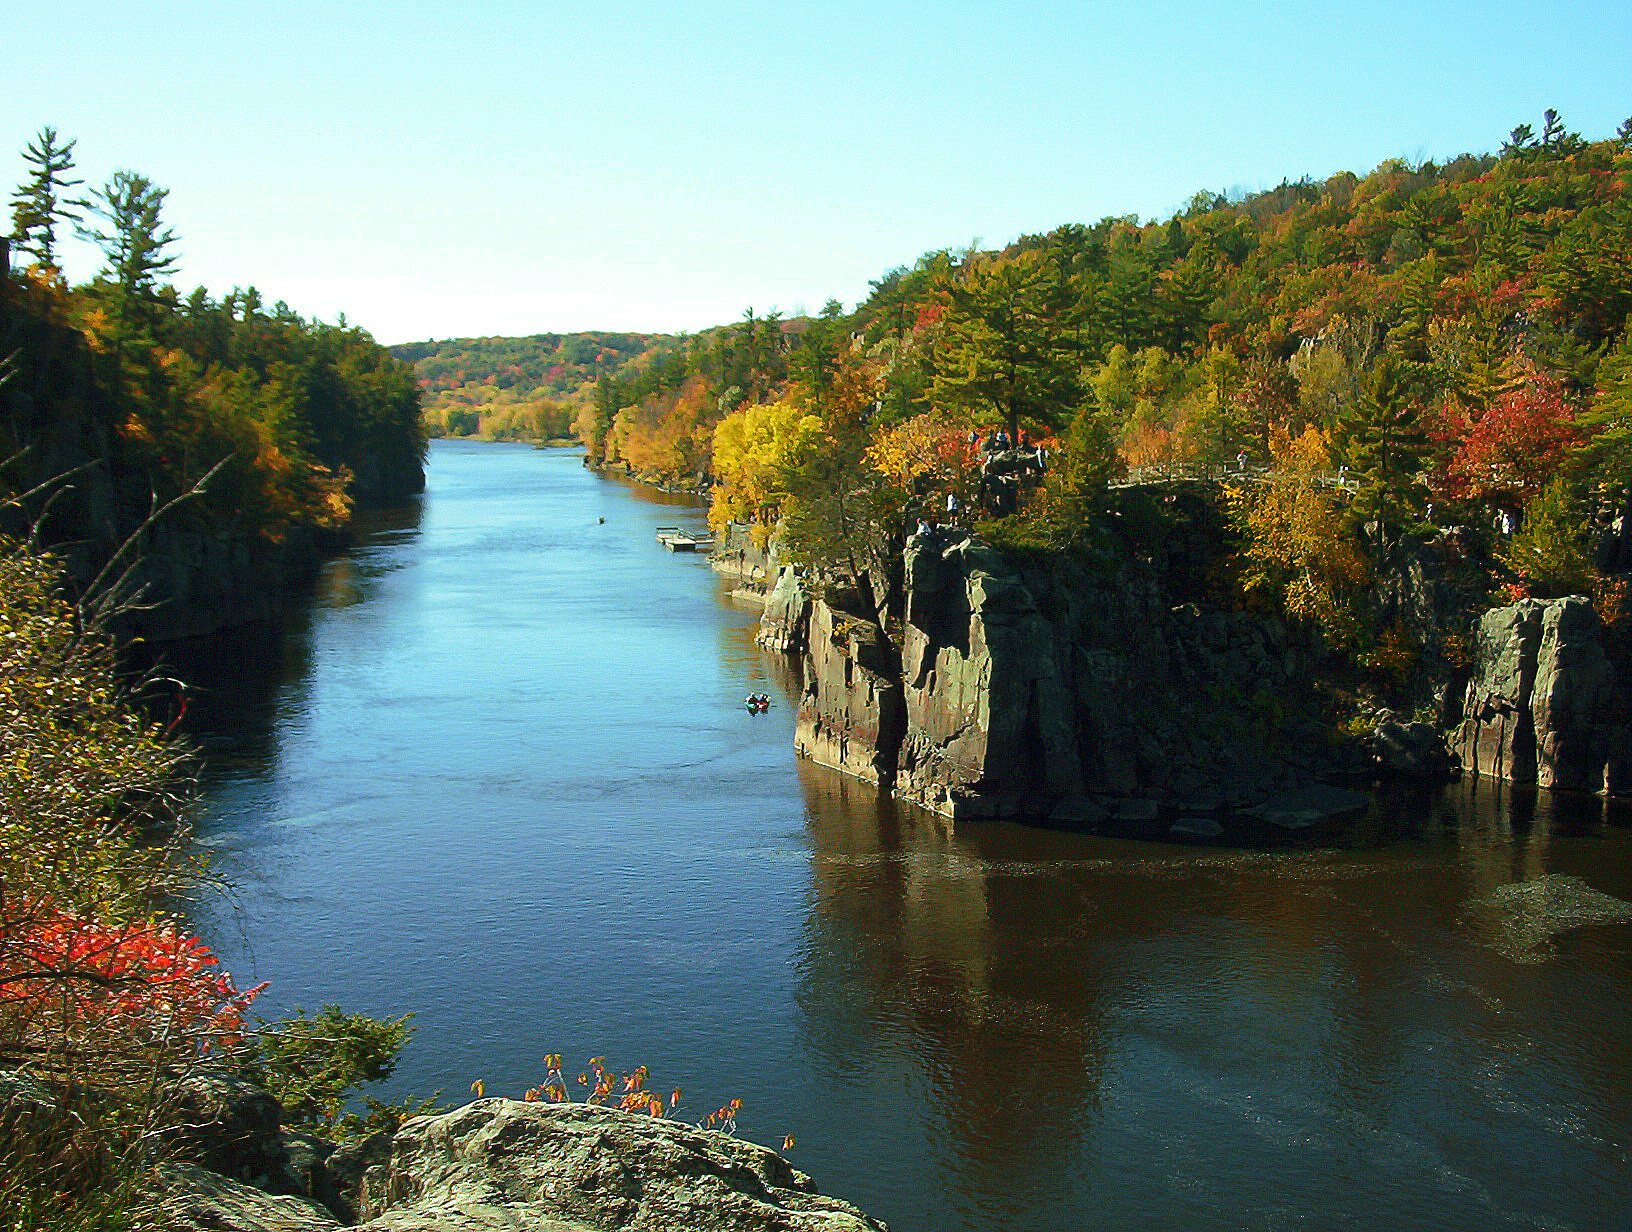 The St. Croix Valley – A National Historic Waterway